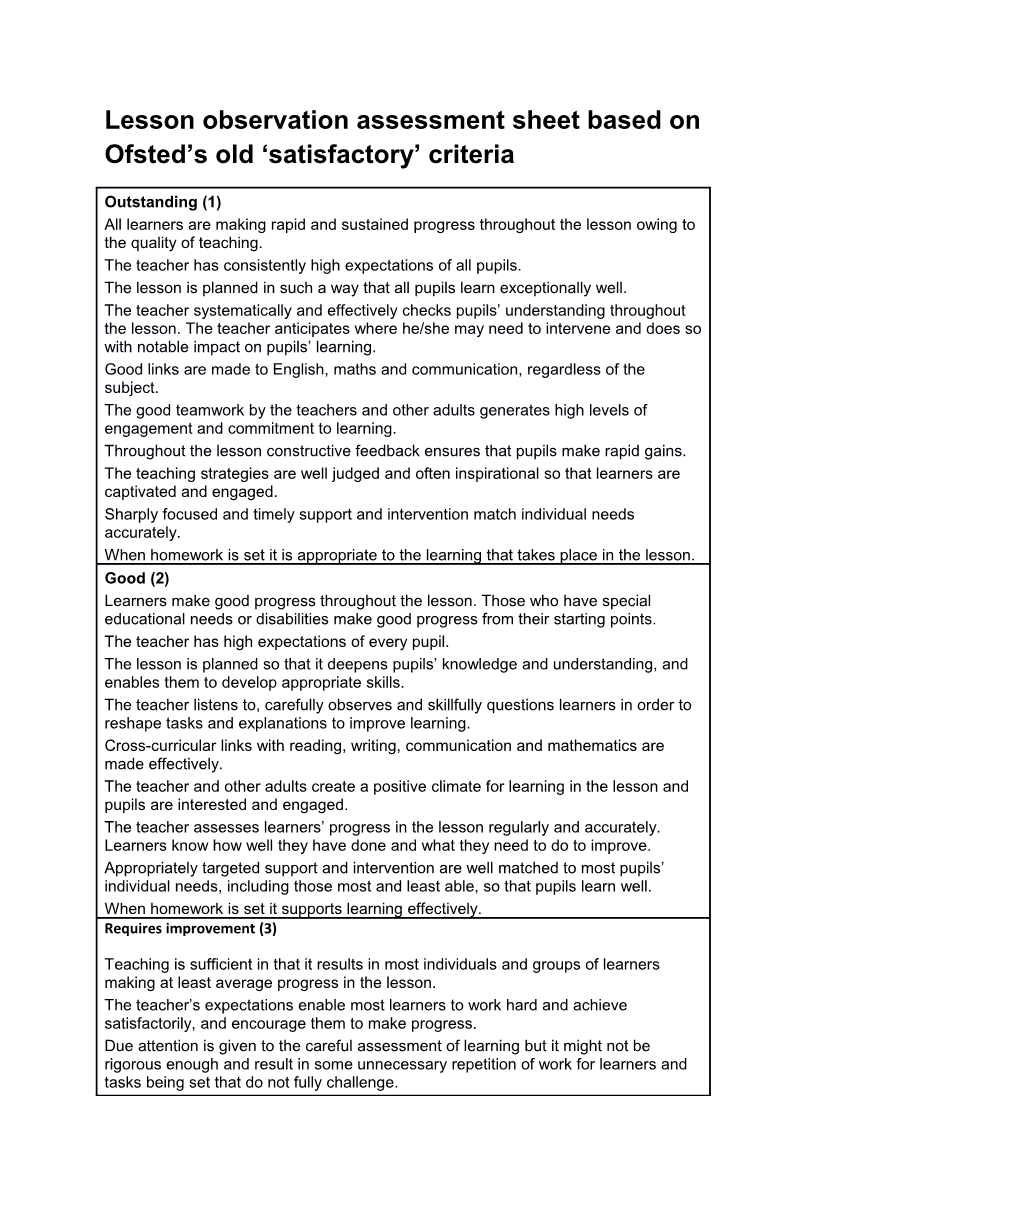 Lesson Observation Assessment Sheet Based on Ofsted S Old Satisfactory Criteria